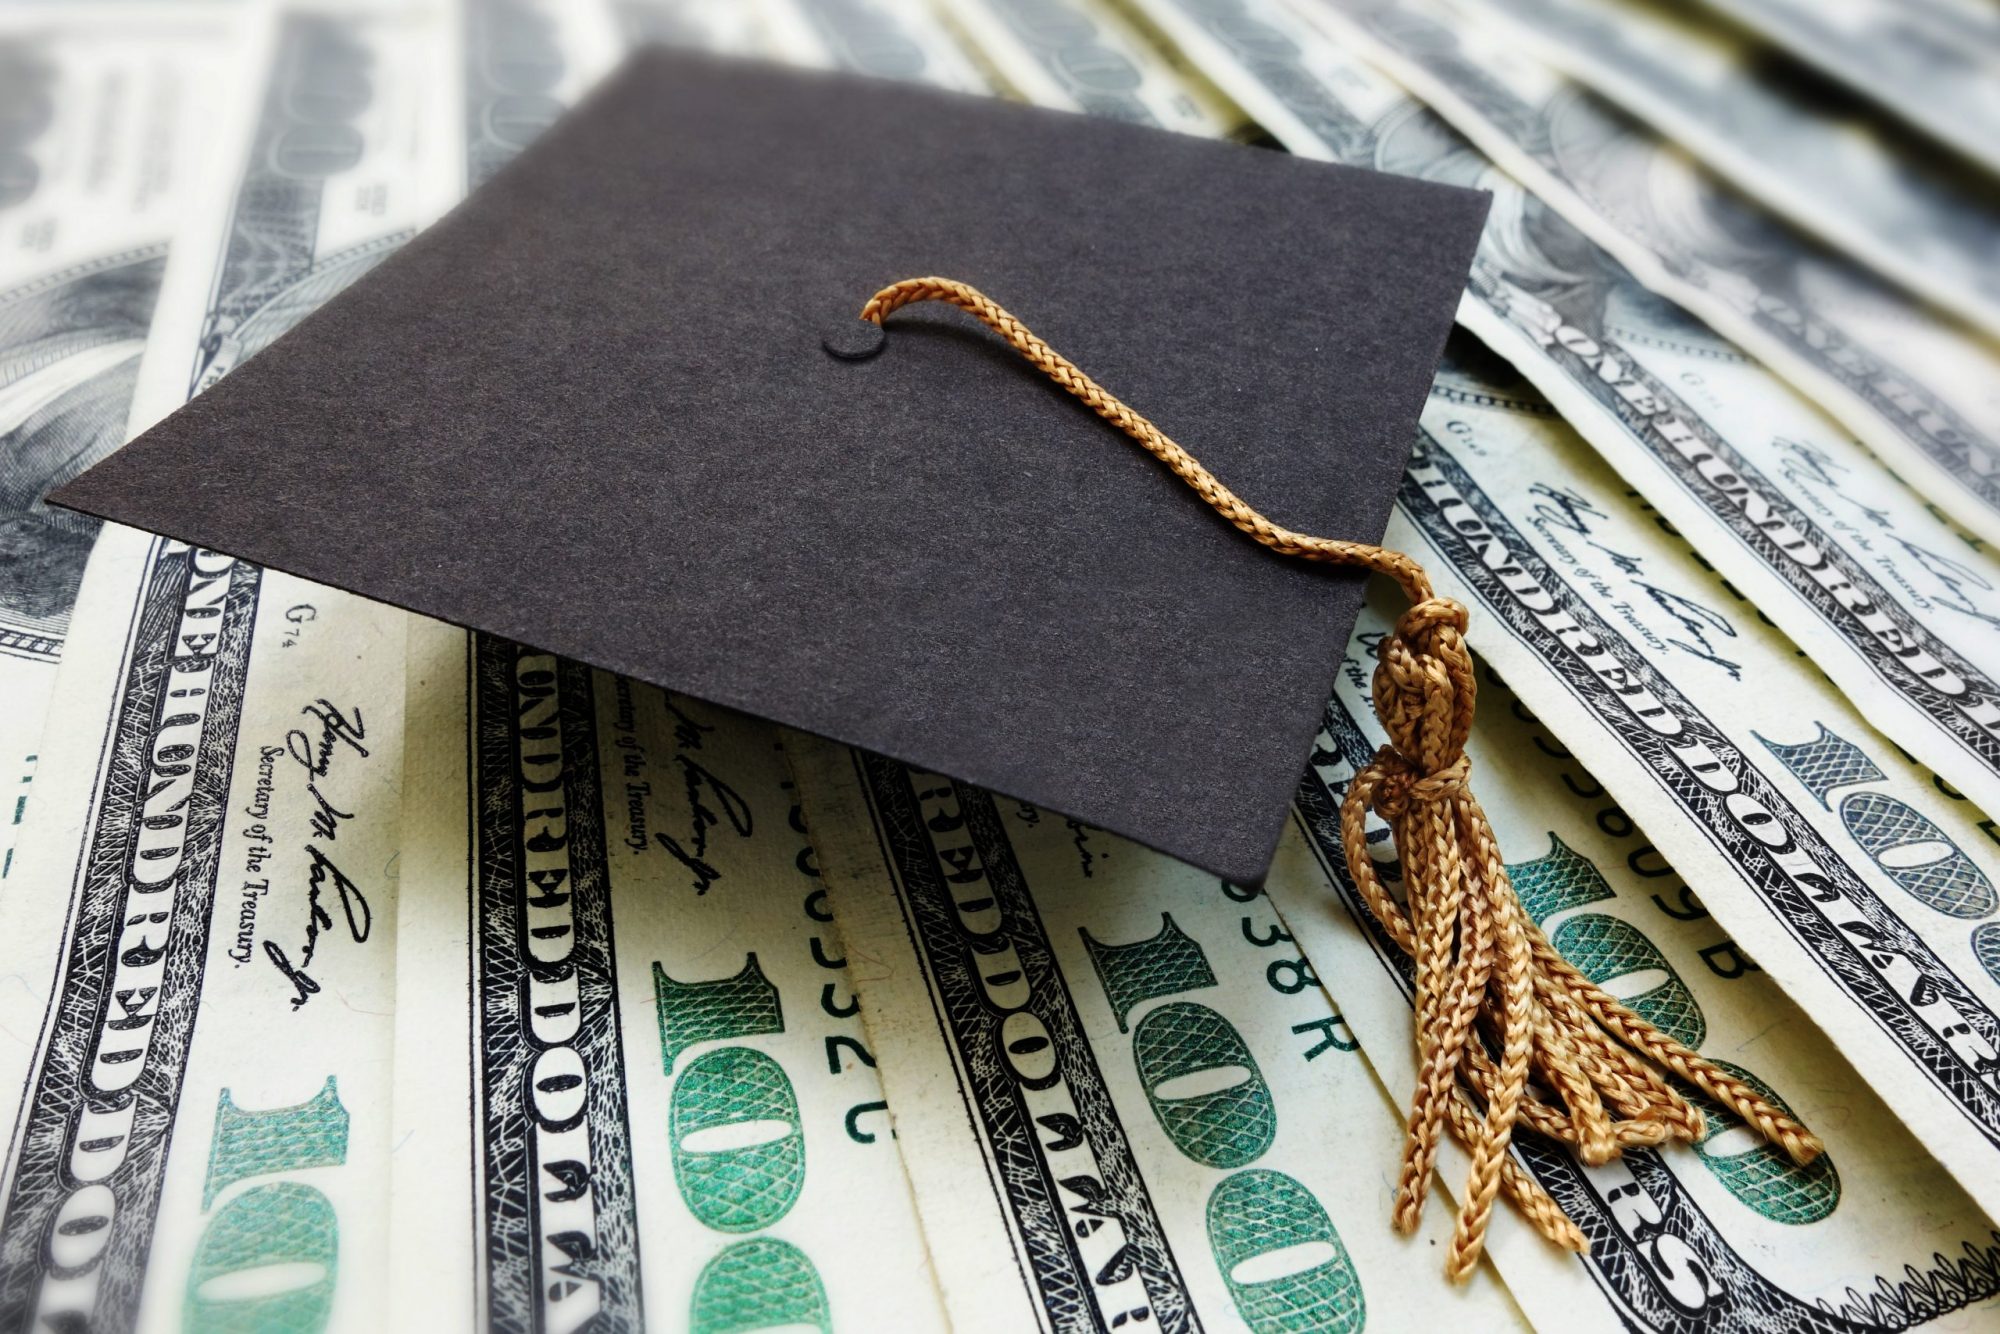 Mini Graduation cap on money, Meet with our illinois divorce attorney to discuss your options